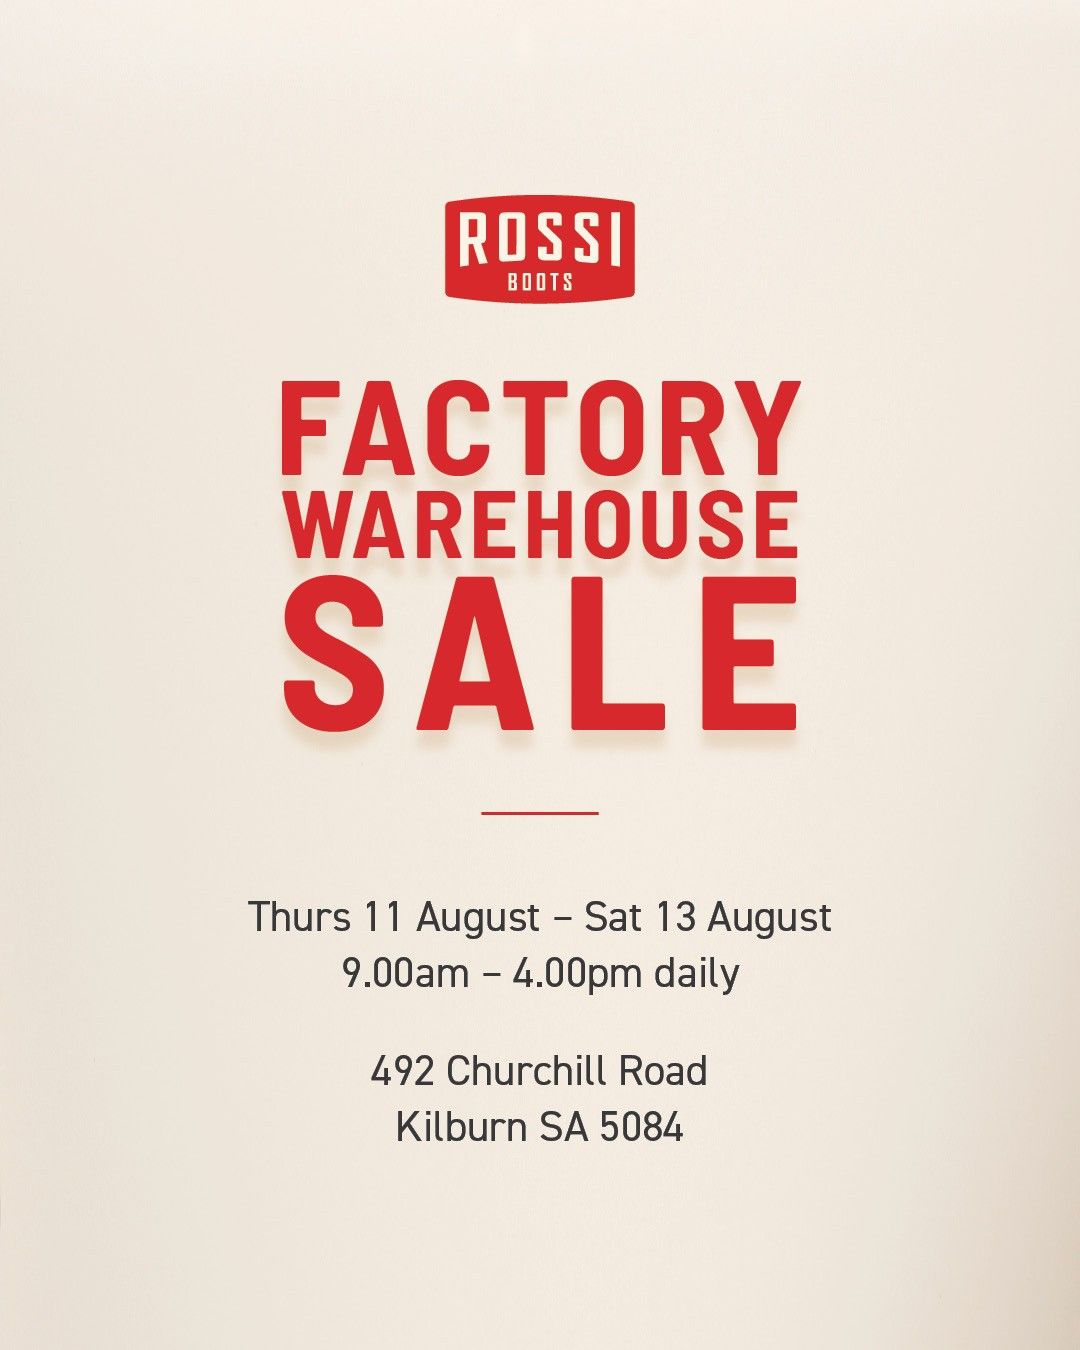 ROSSI BOOTS FACTORY WAREHOUSE SALE 

Our factory warehouse sale will now be h...

Choose from thousands of men and women's boots at crazy prices. Featuring discontinued lines, seconds and samples, prices will start as low as $79!

Rossi’s extensive range of work boots will also be heavily discounted, giving boot lovers the chance to pick up a pair of their favourites. 

See you there!